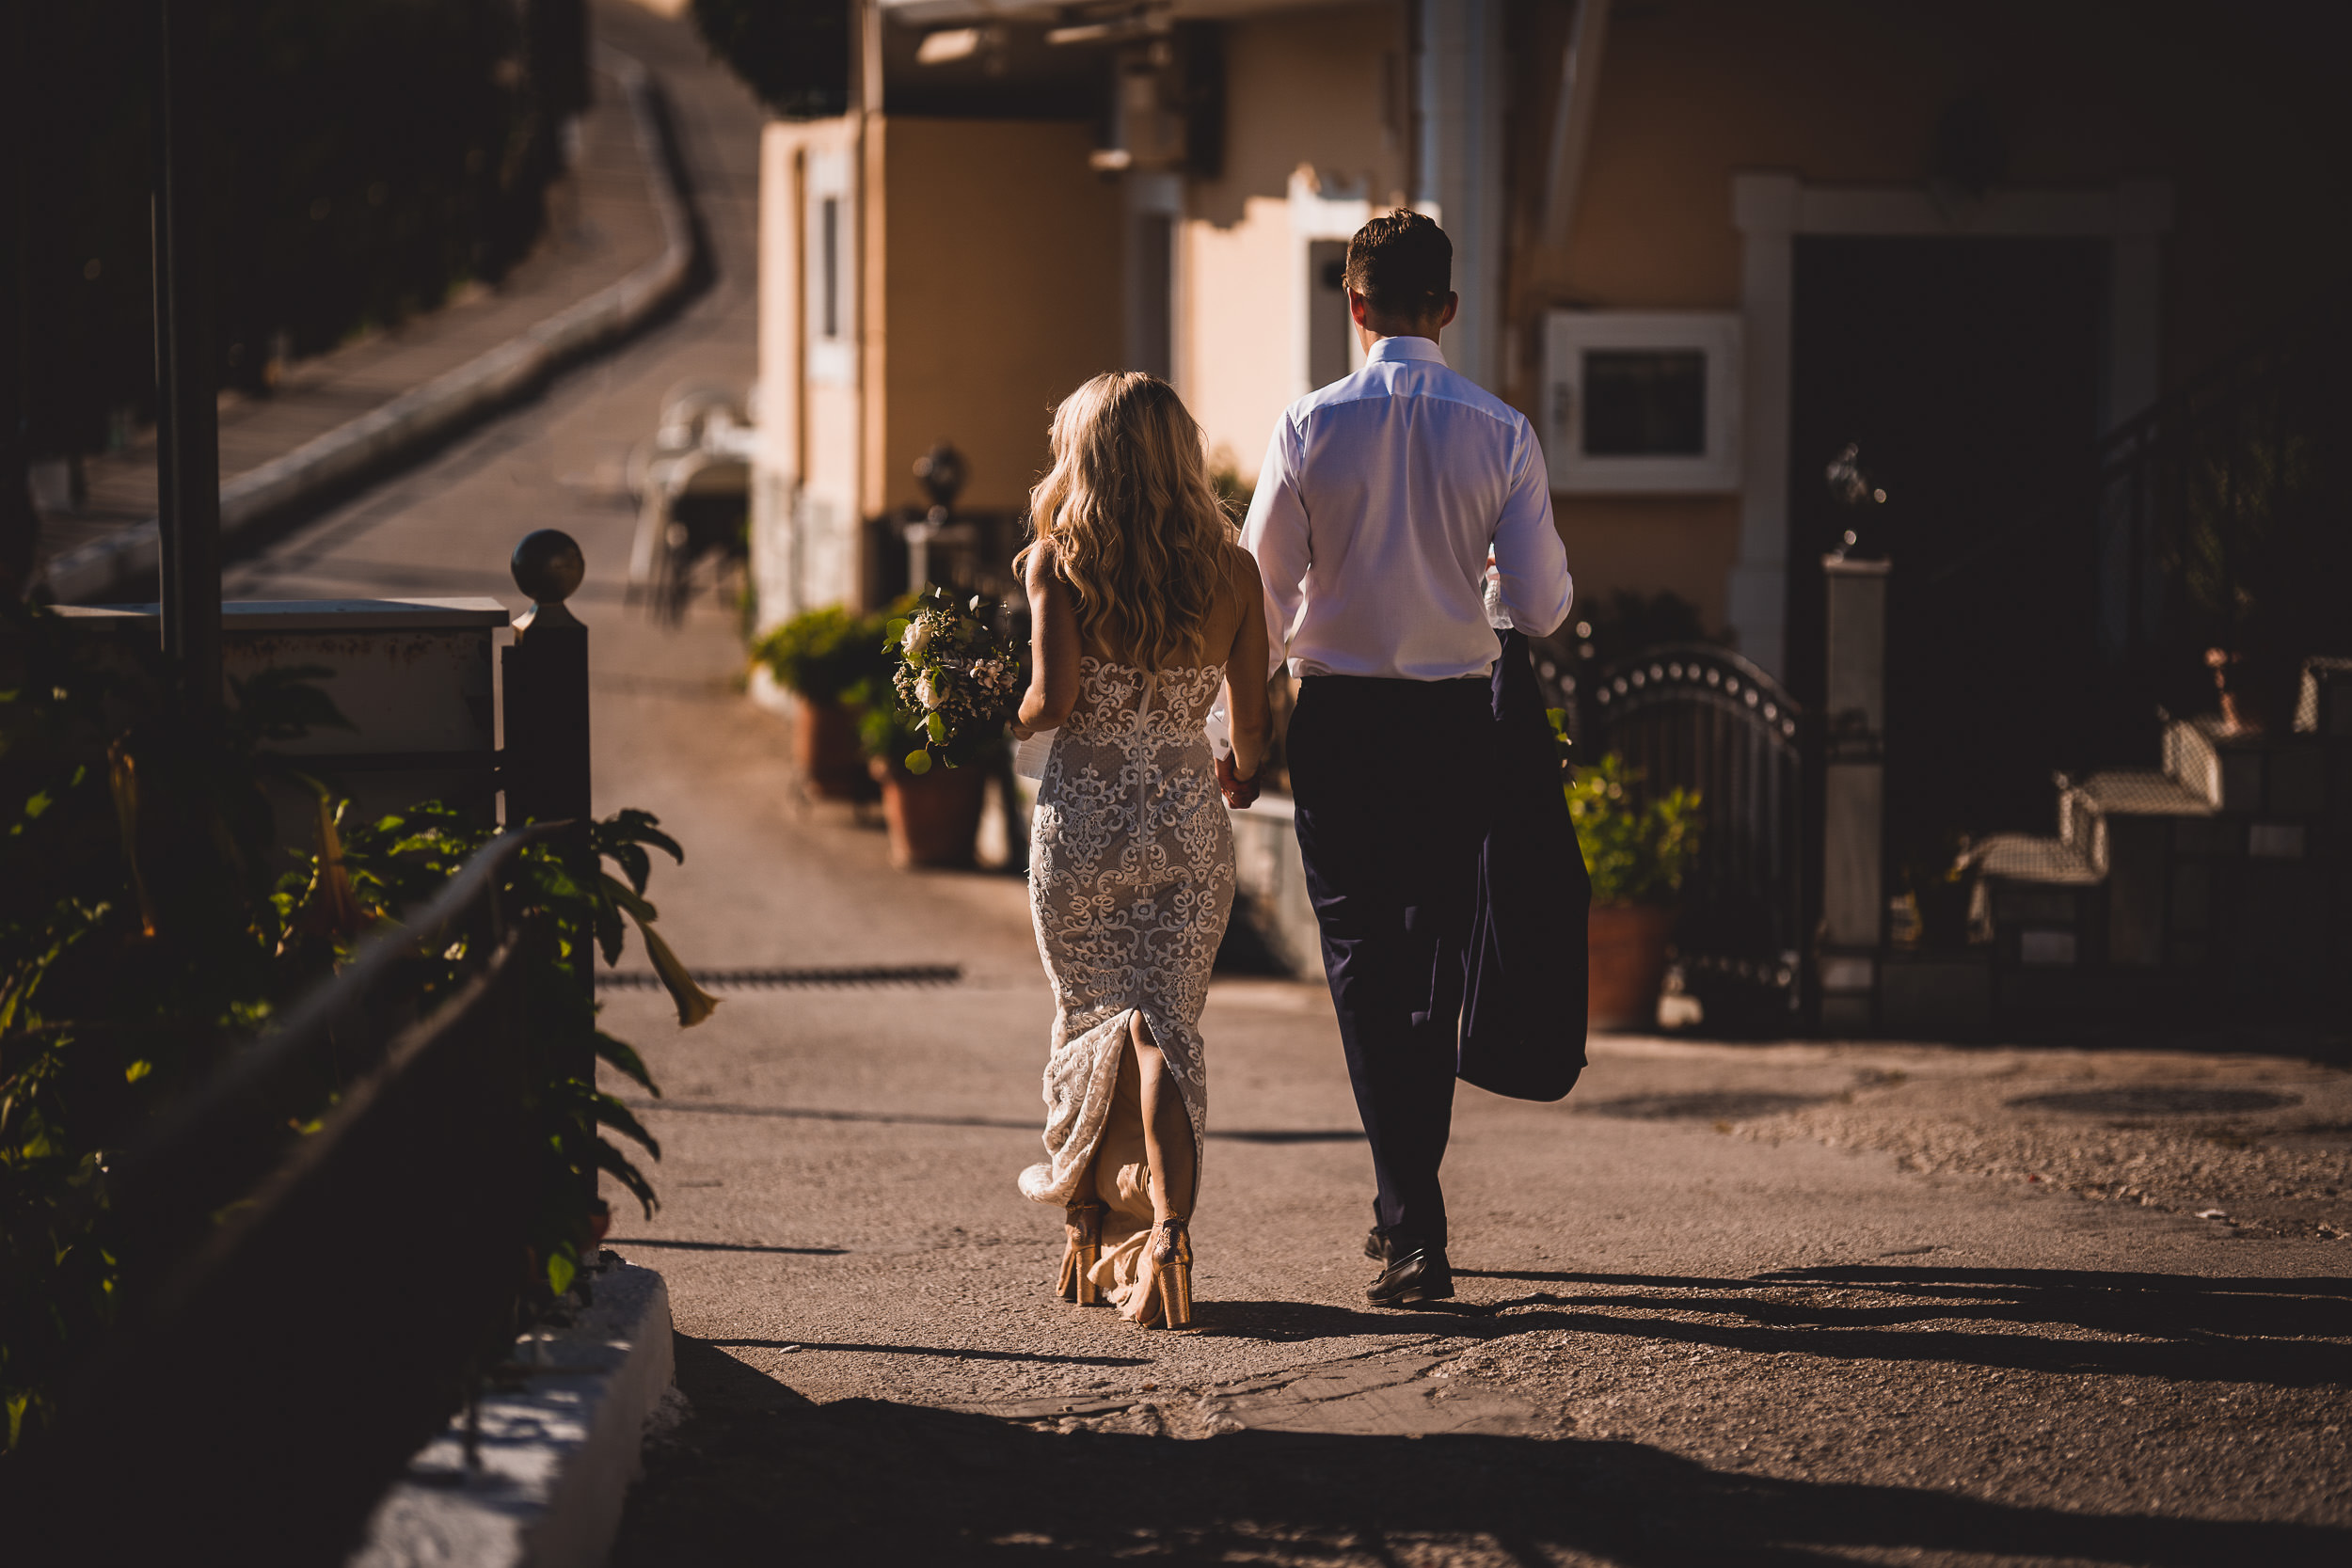 A wedding photographer captures the groom and bride strolling down a narrow street on their special day.